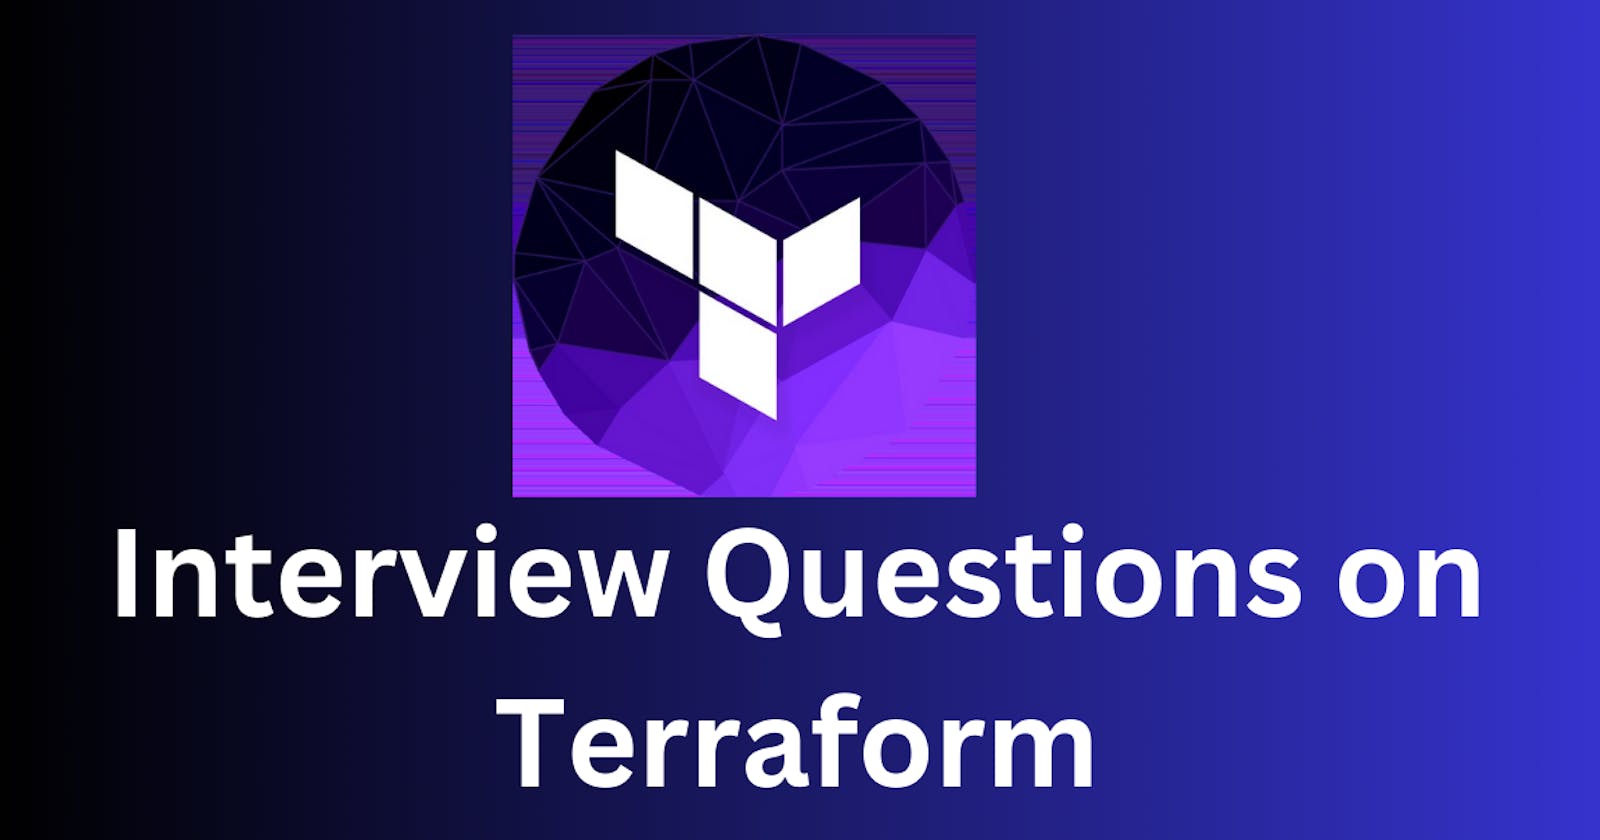 Day 71 - Let's Prepare for Some Terraform Interview Questions! 🔥